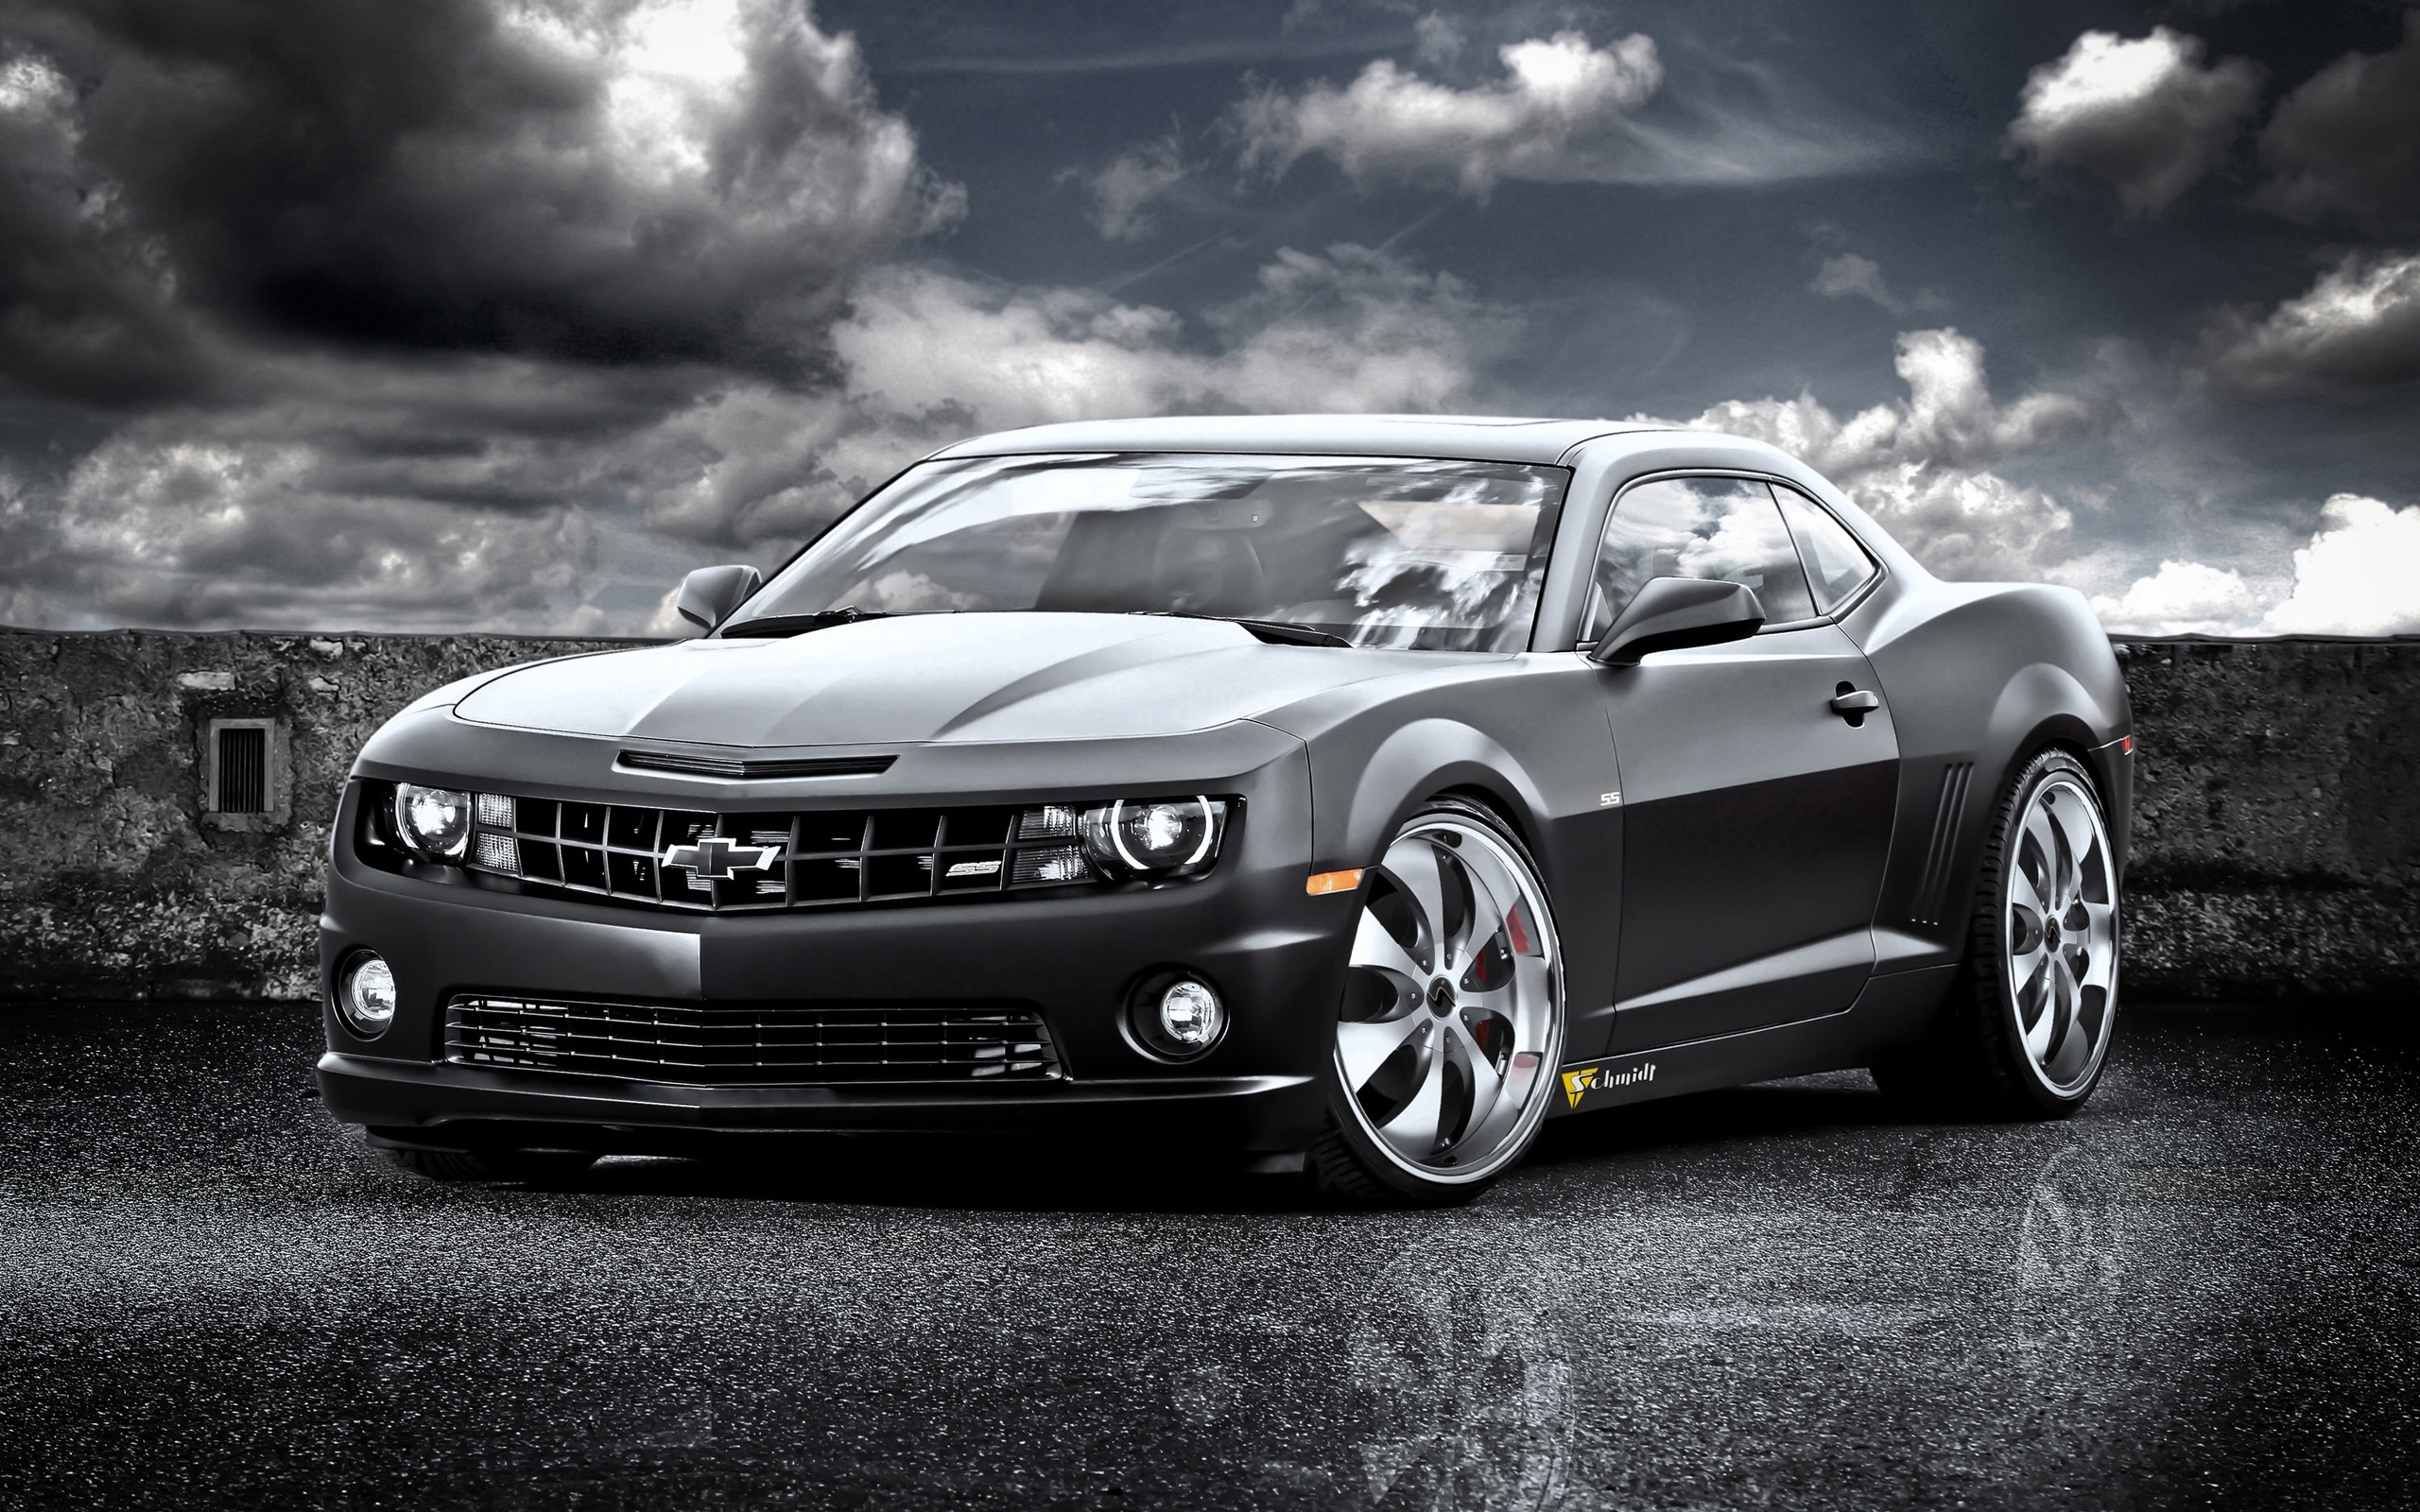 Download Chevrolet camaro ss   Cars wallpapers for your mobile